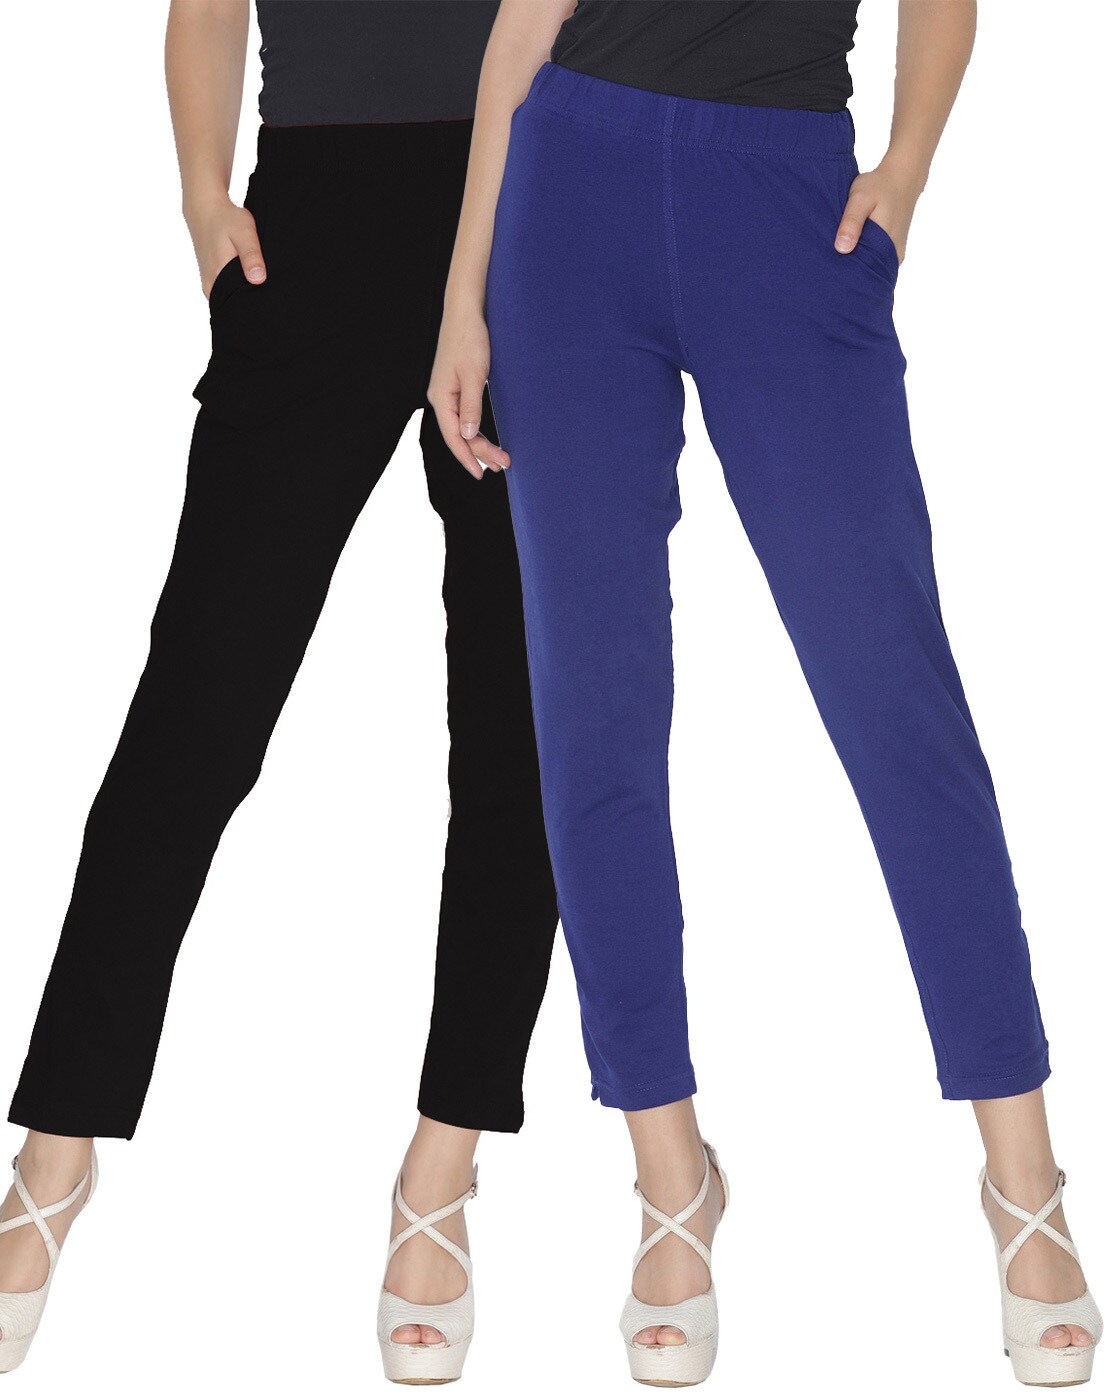 Comfort Lady - Try out our cotton pants with cool &... | Facebook